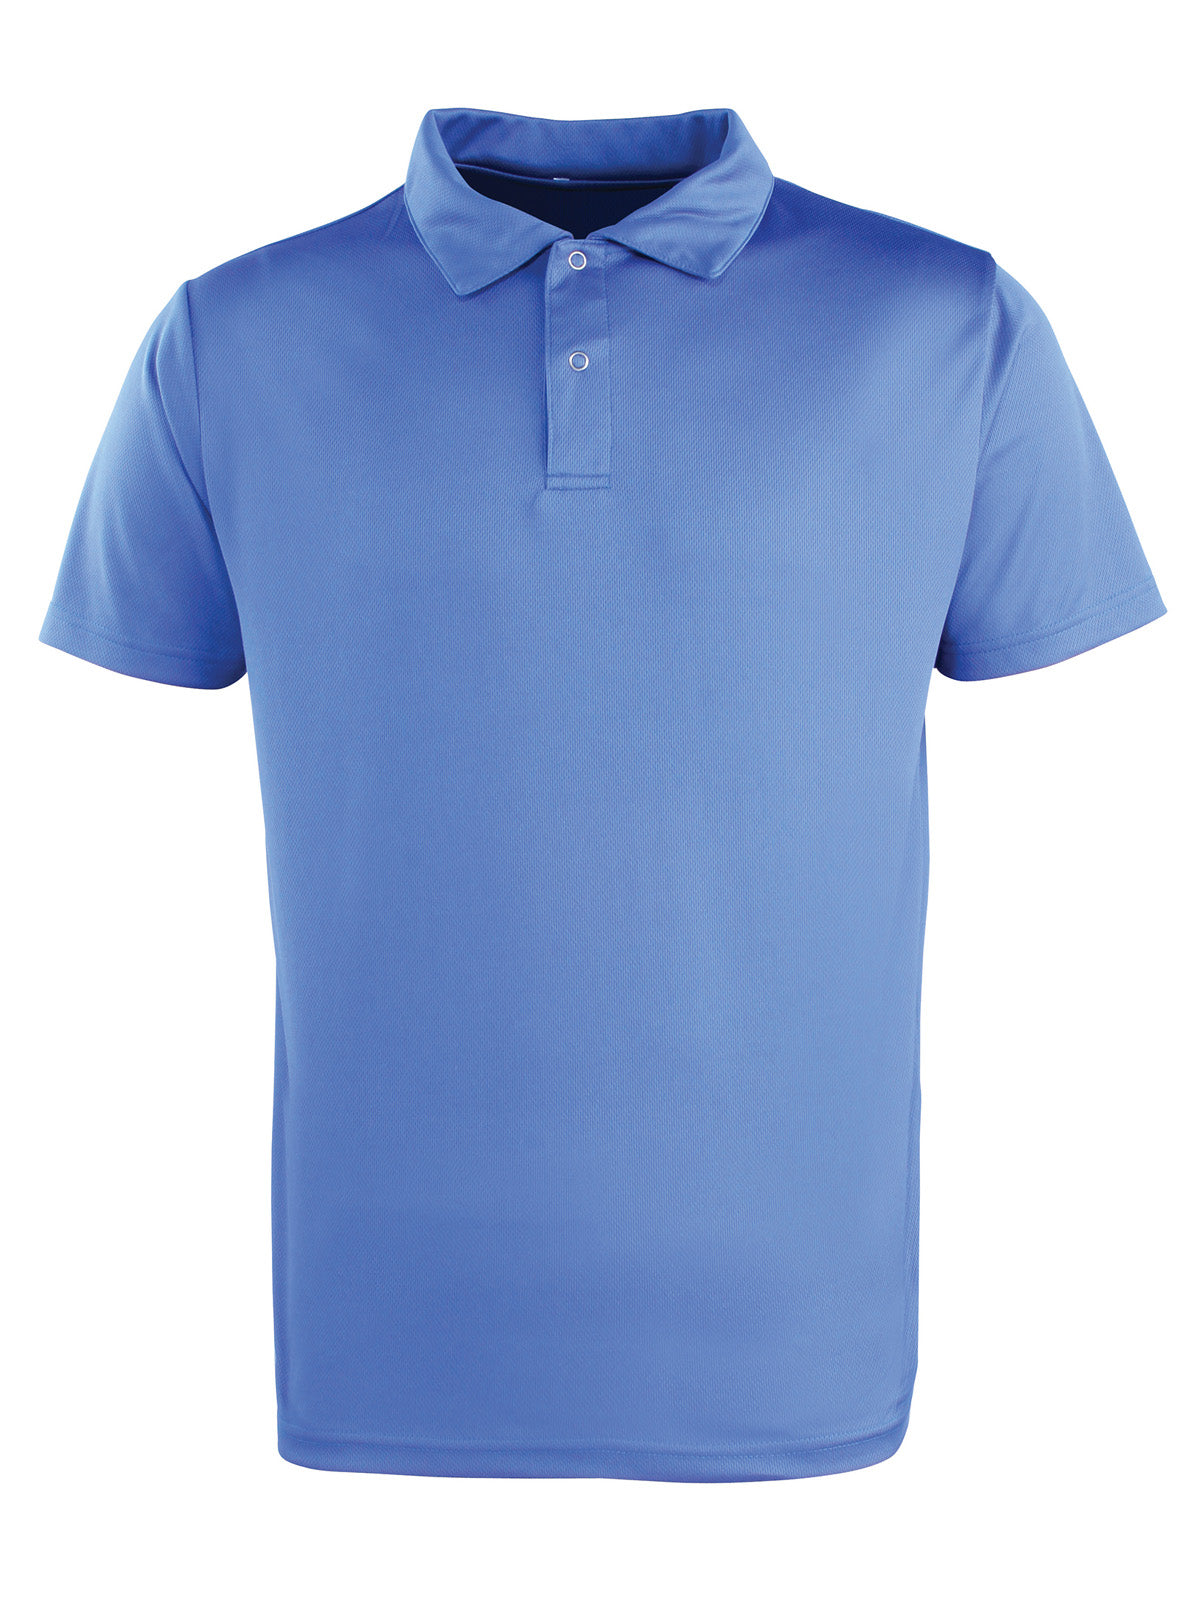 Photo of Premier Coolchecker Studded Polo in Royal, front view